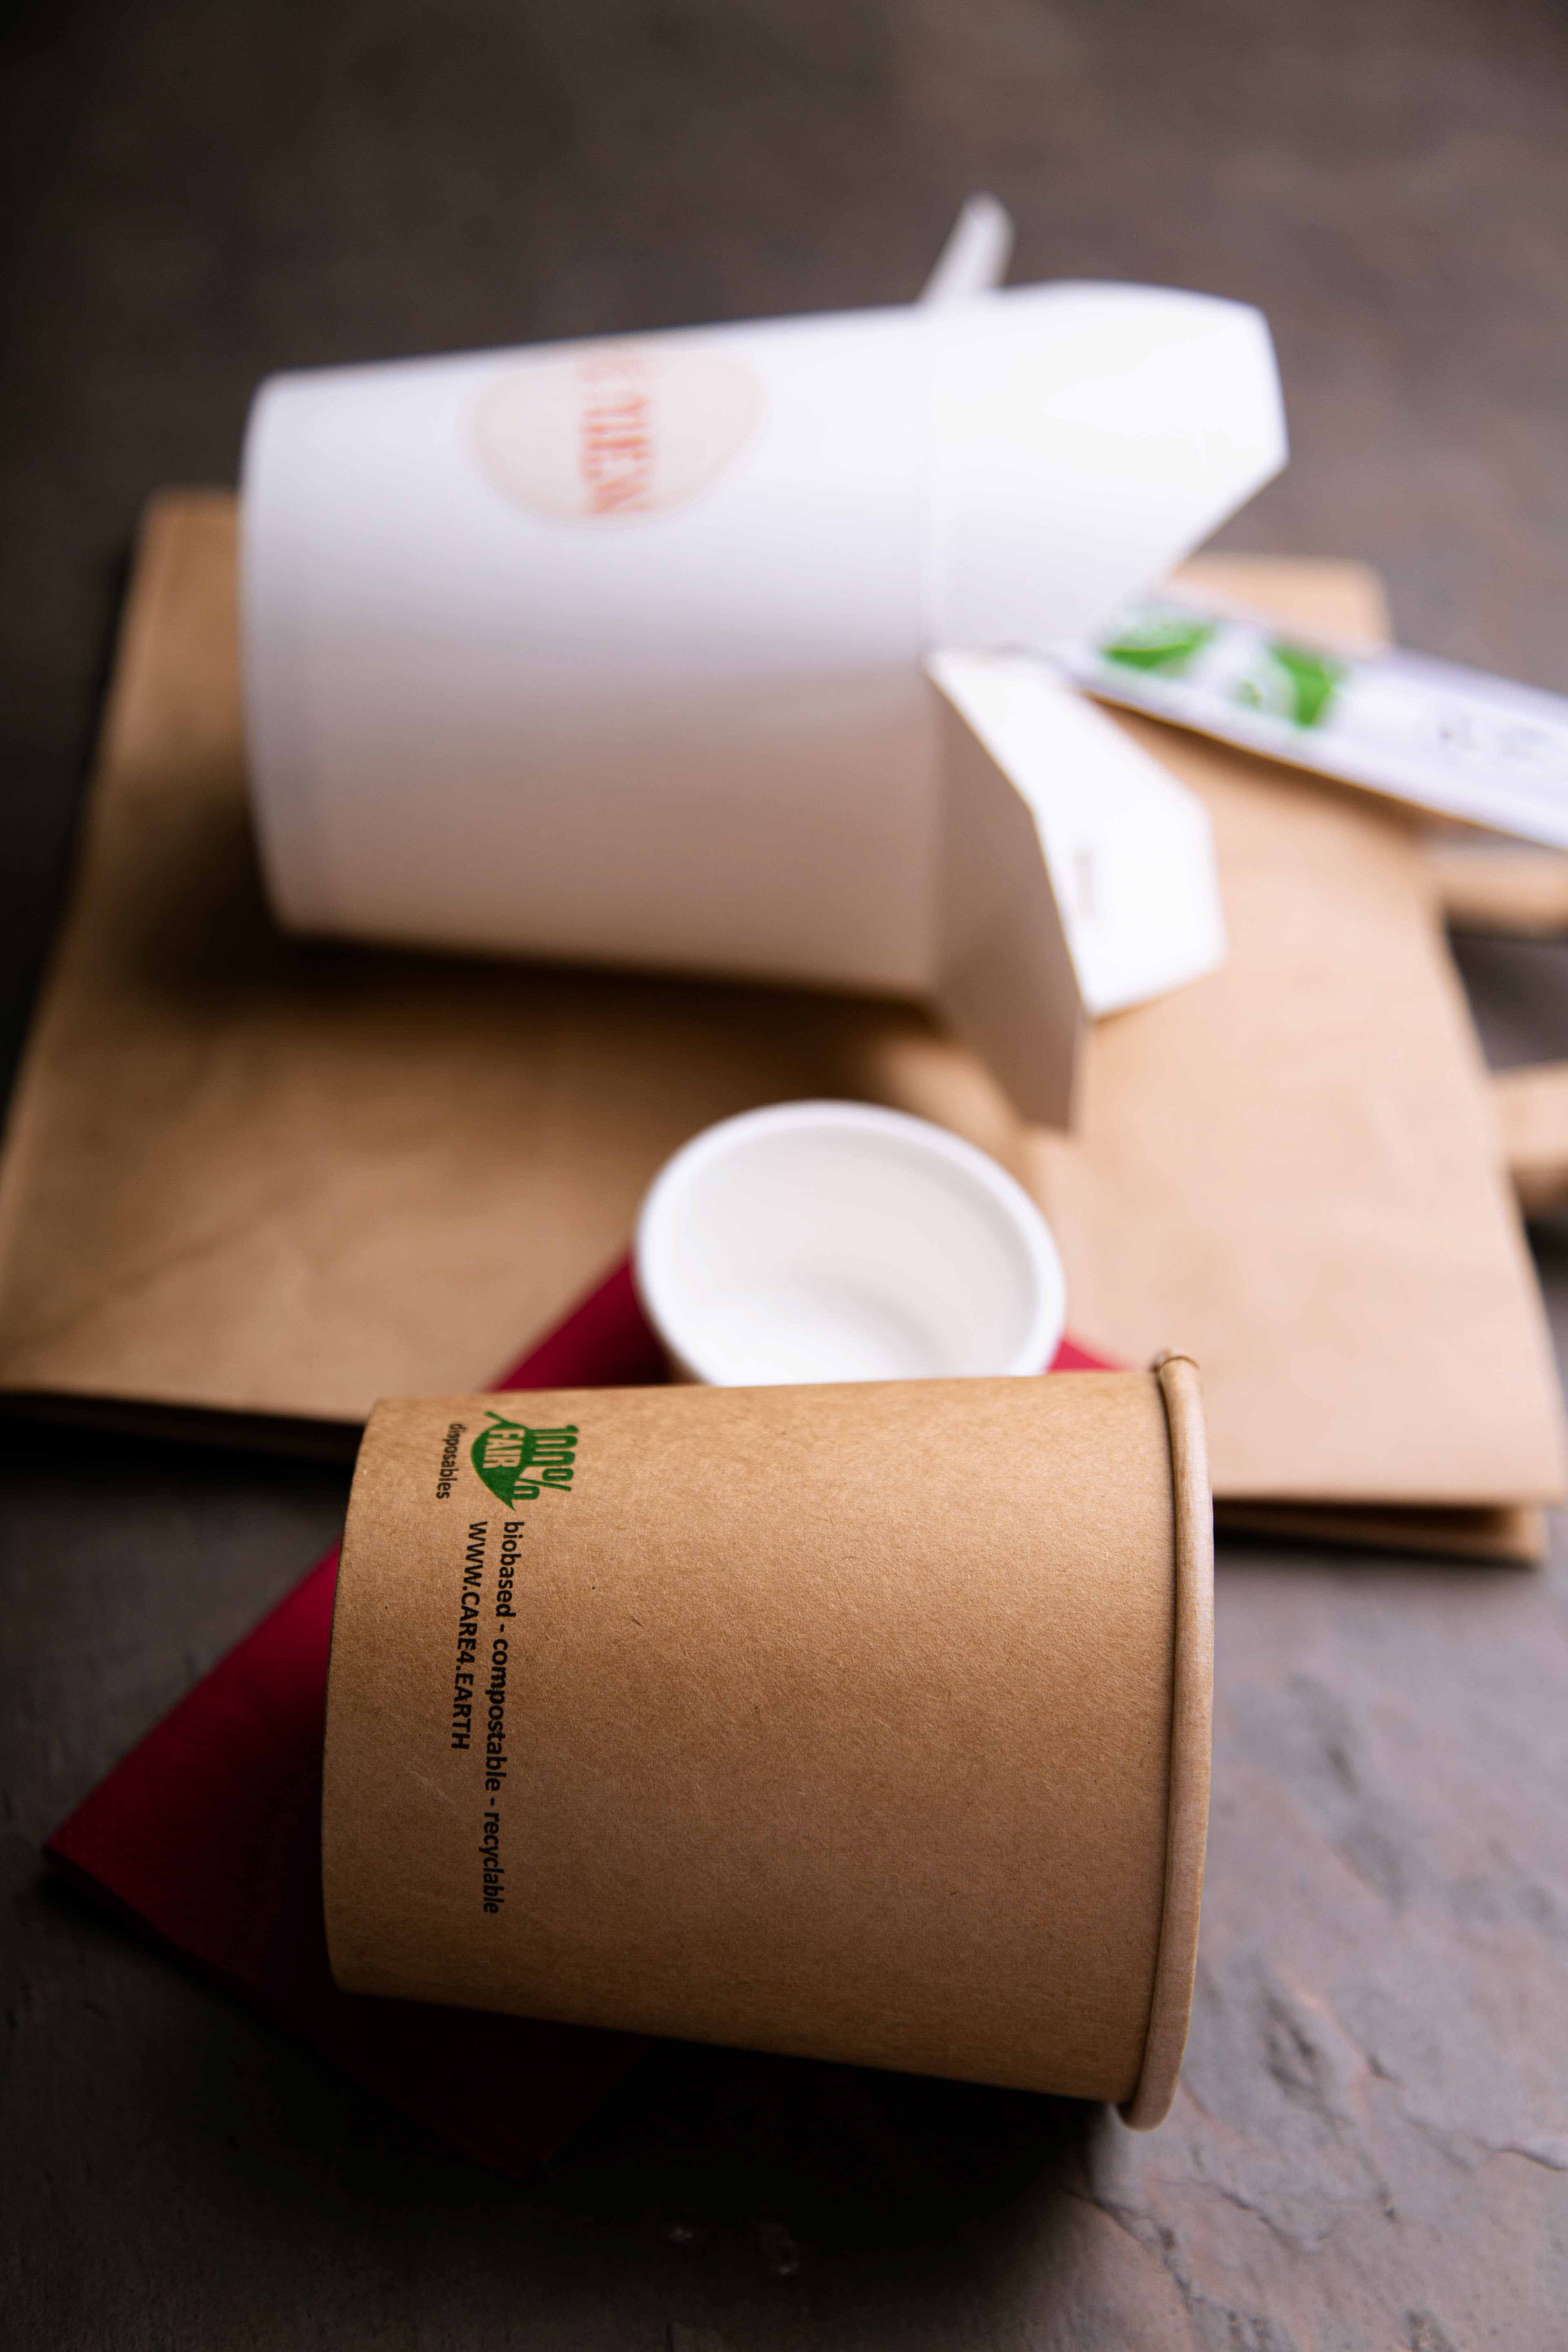 Different sustainable packaging from the restaurant.